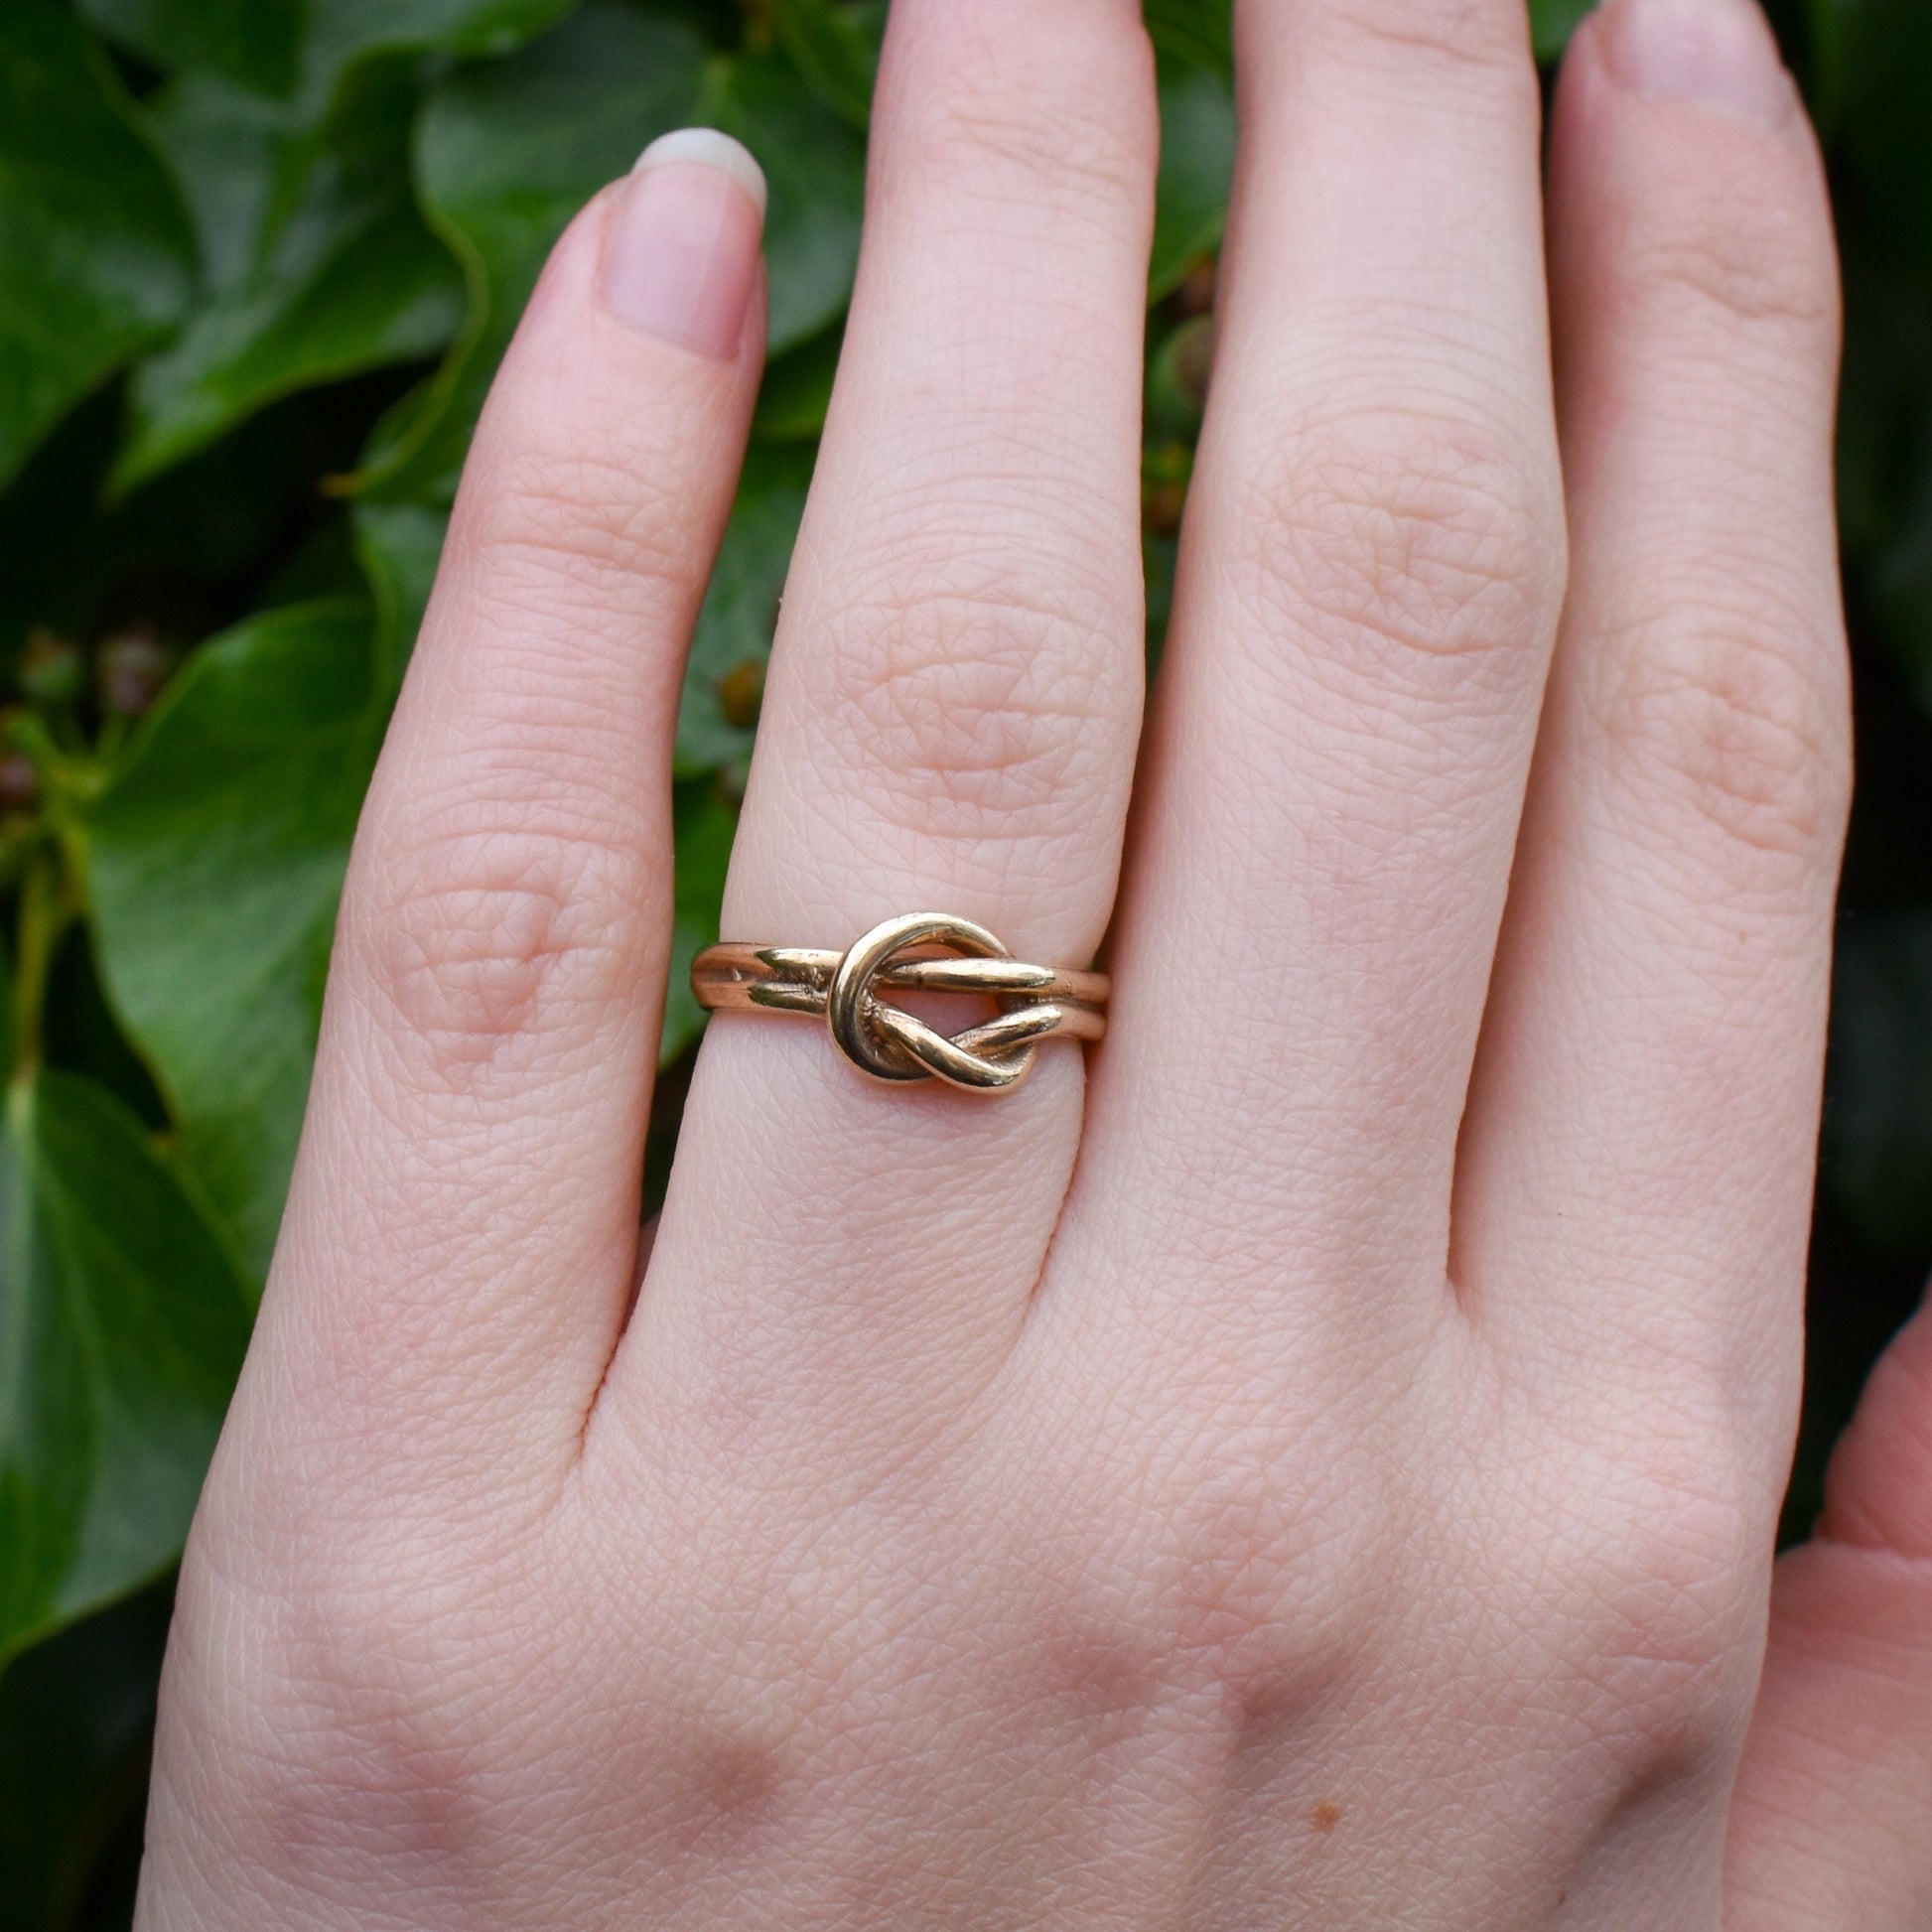 Vintage '1978' Lovers Knot 9ct Gold Ring Band